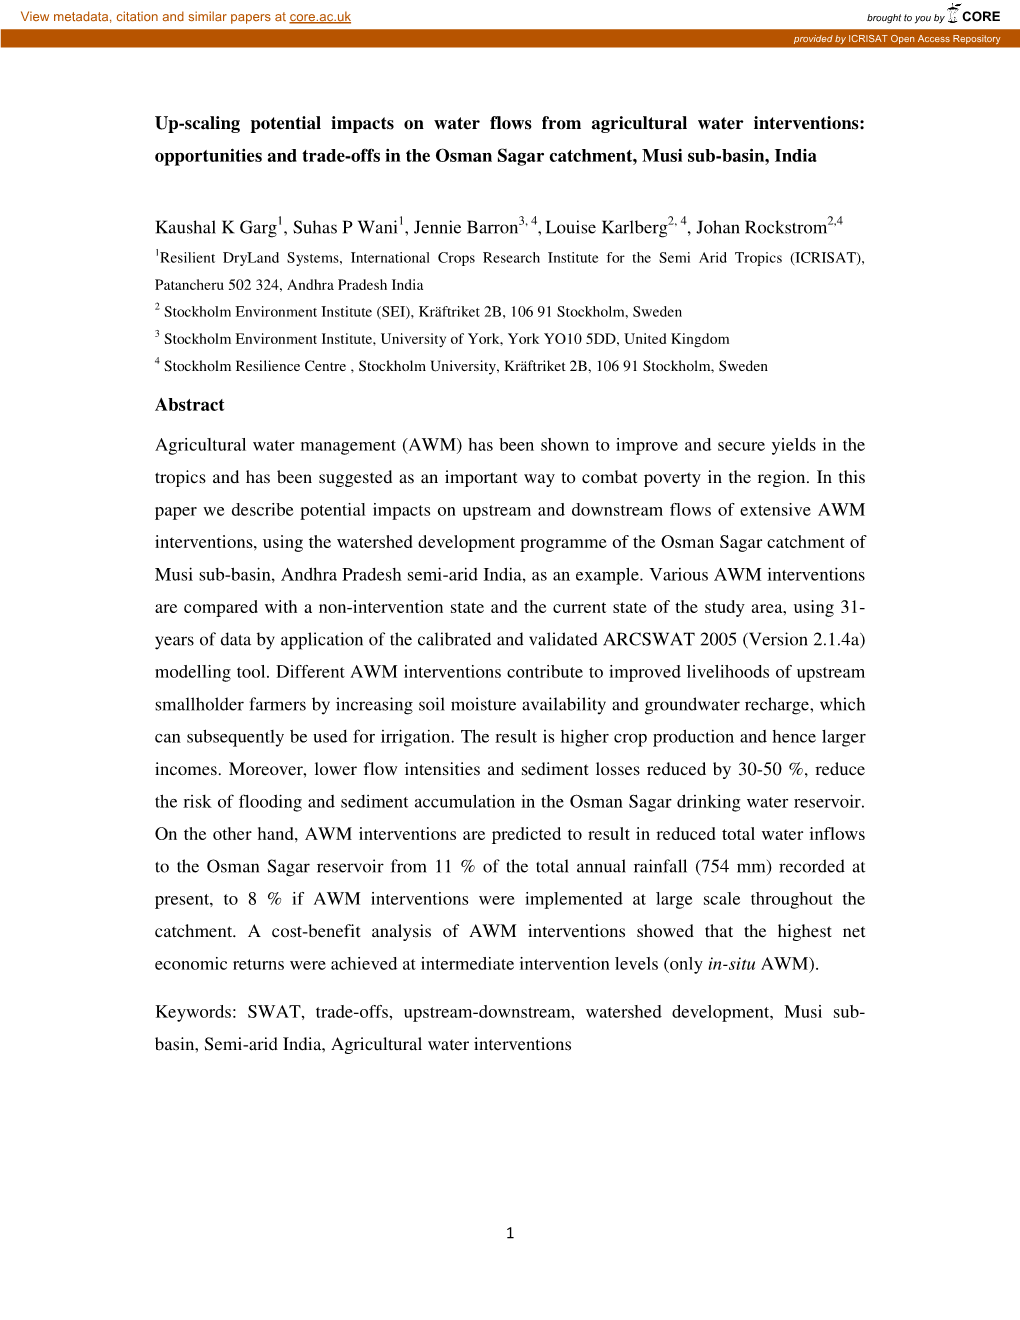 Up-Scaling Potential Impacts on Water Flows from Agricultural Water Interventions: Opportunities and Trade-Offs in the Osman Sagar Catchment, Musi Sub-Basin, India